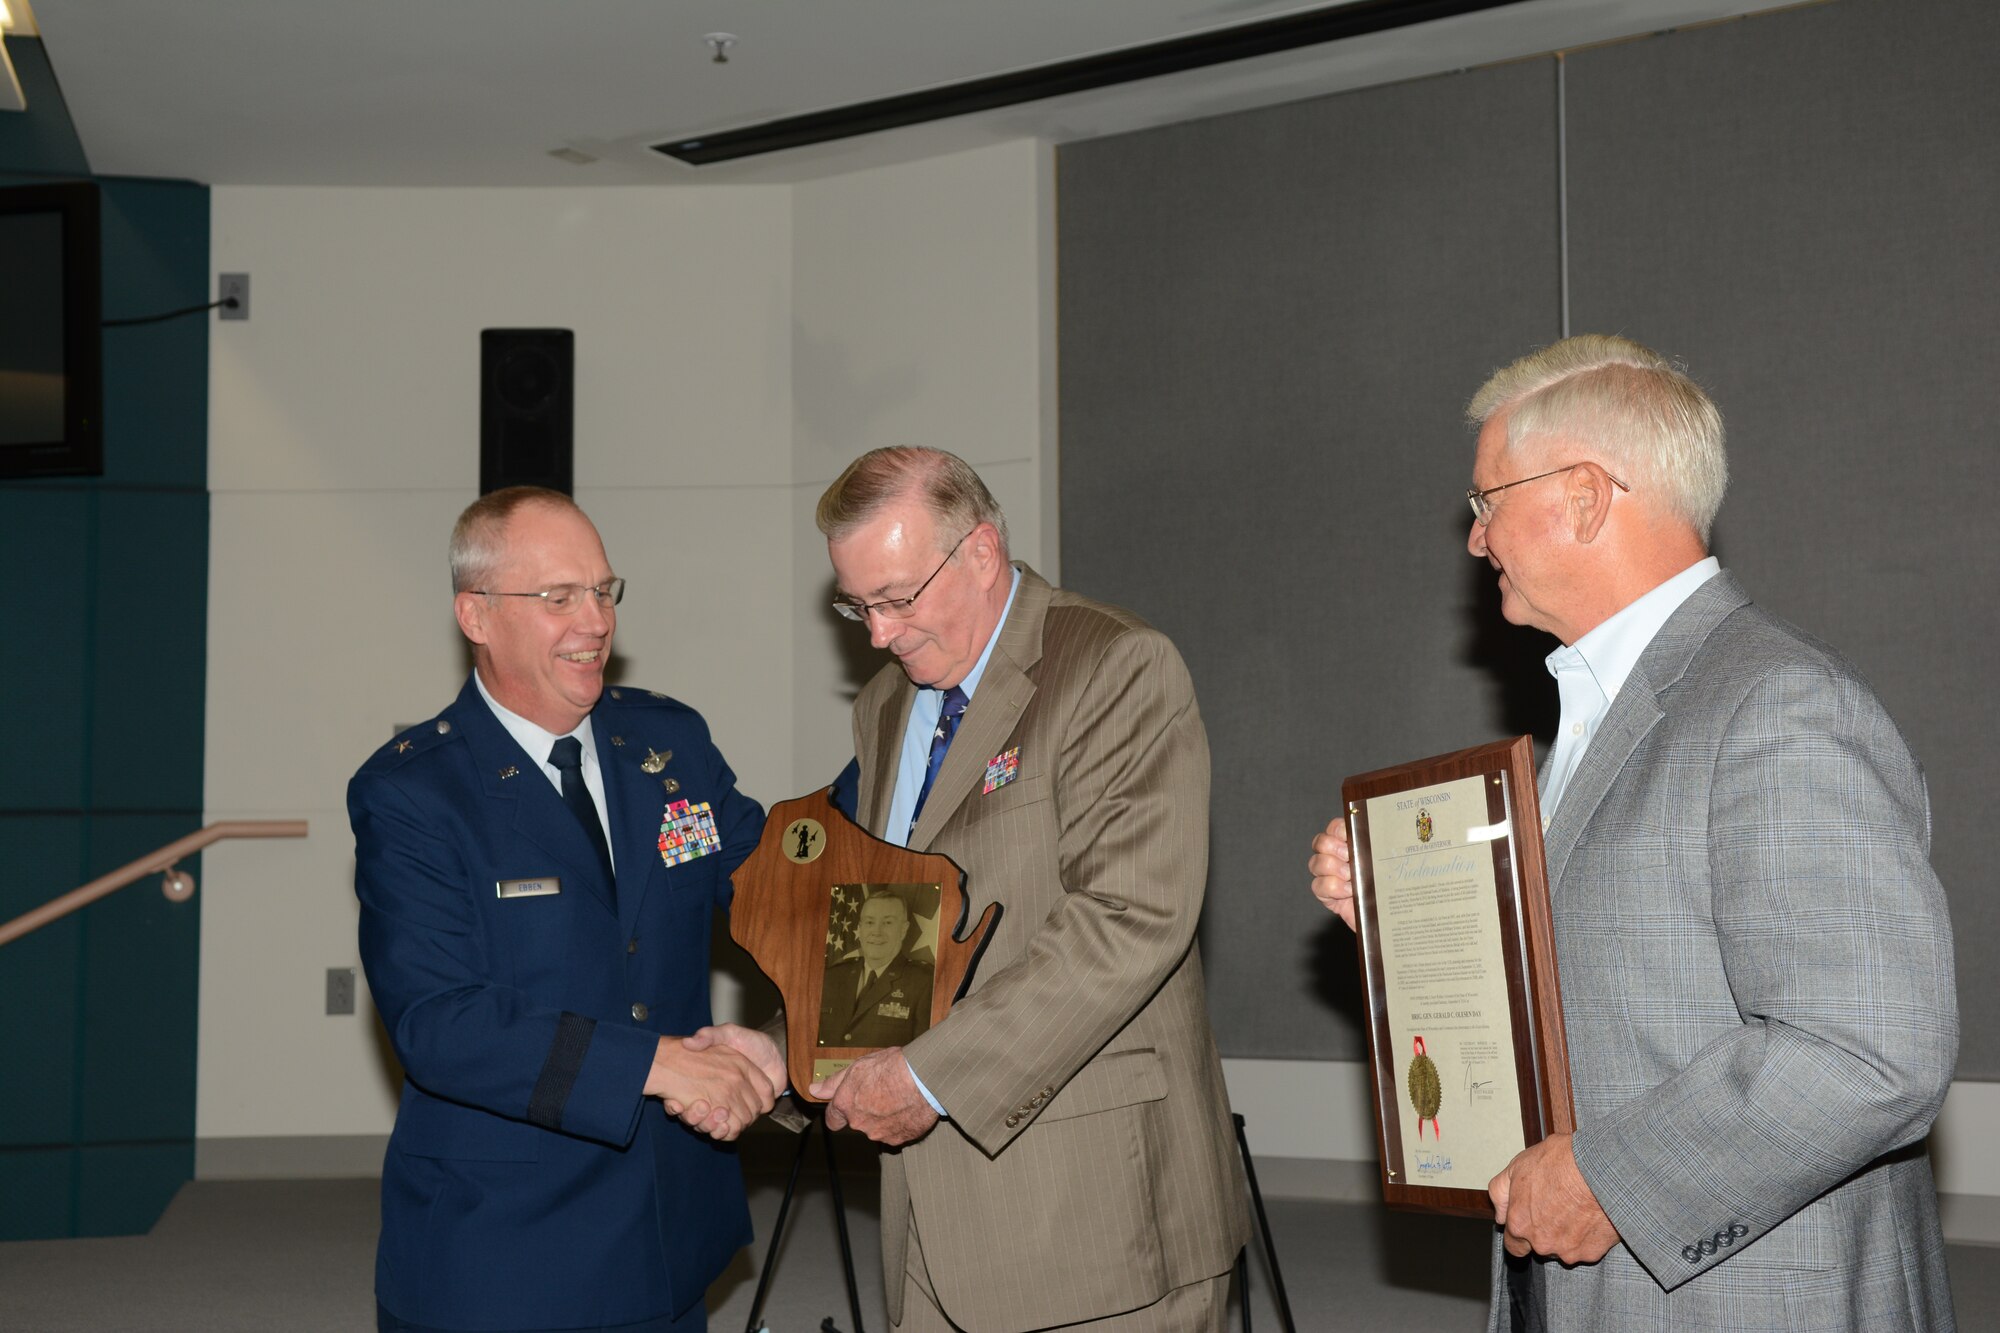 Retired Brig. Gen. Gerald C. Olesen receives the Wisconsin Air National Guard Hall of Fame induction award from Brig. Gen. Gary Ebben, assistant adjutant general for Air, during a Sept. 6 ceremony at Joint Force Headquarters, Madison, Wis. Retired Maj. Gen. Al Wilkening, former Wisconsin adjutant general, was by his side during the presentation. (Air National Guard photo by 1st Lt. Matthew Wunderlin)